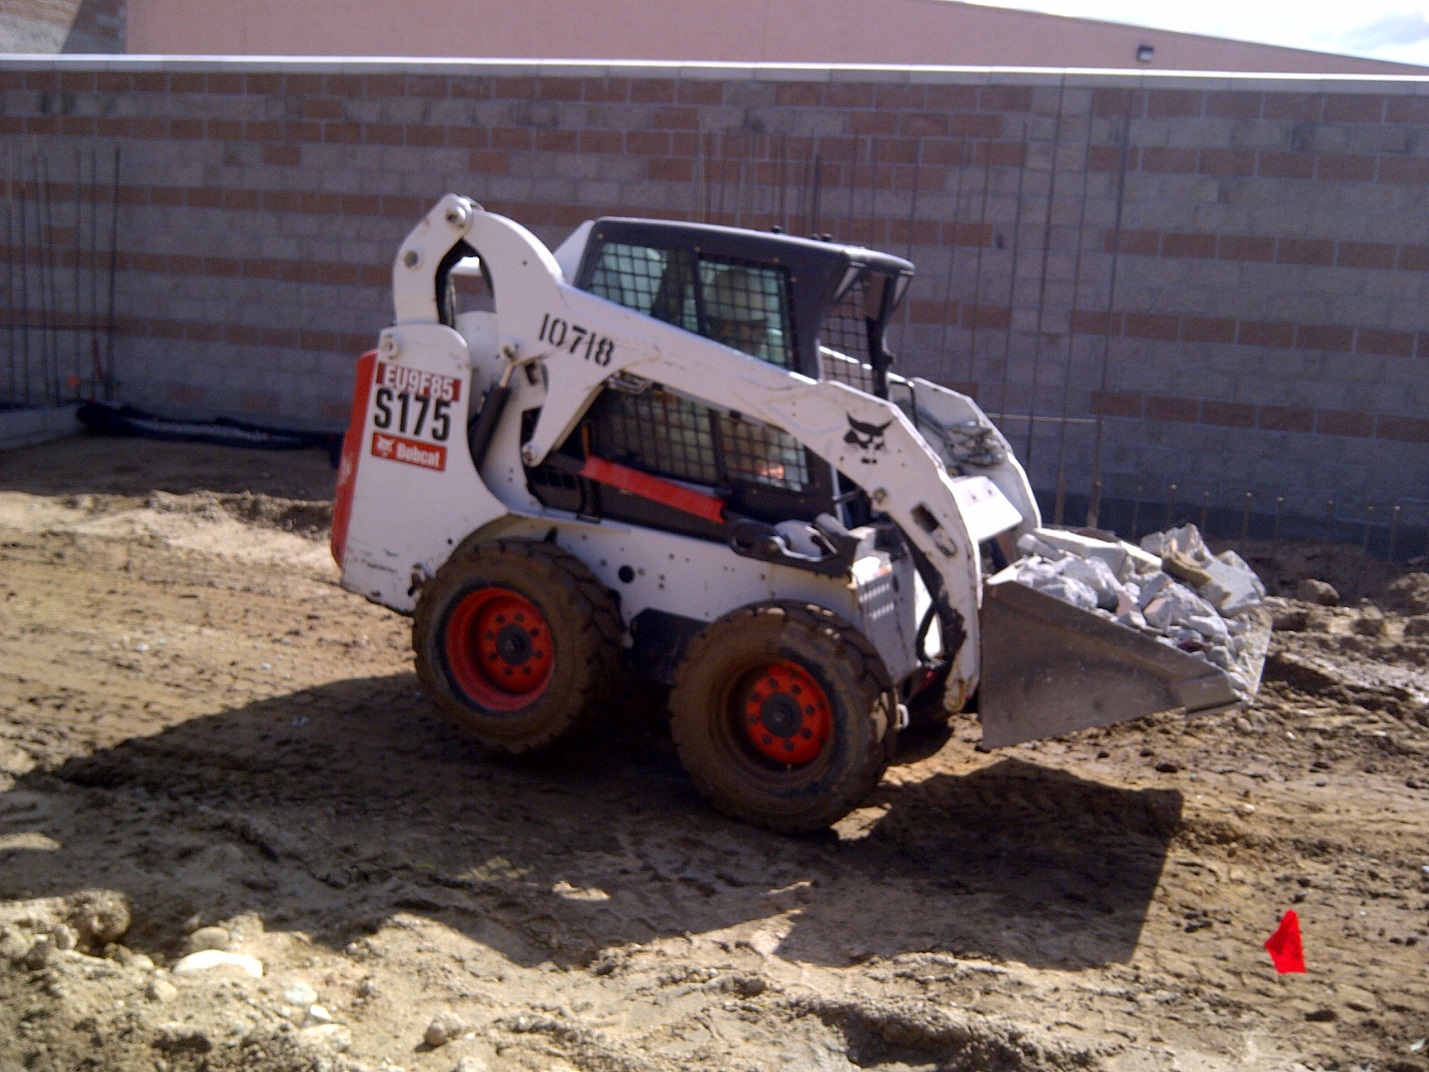 Amazing Bobcat Skid Steer Pictures & Backgrounds